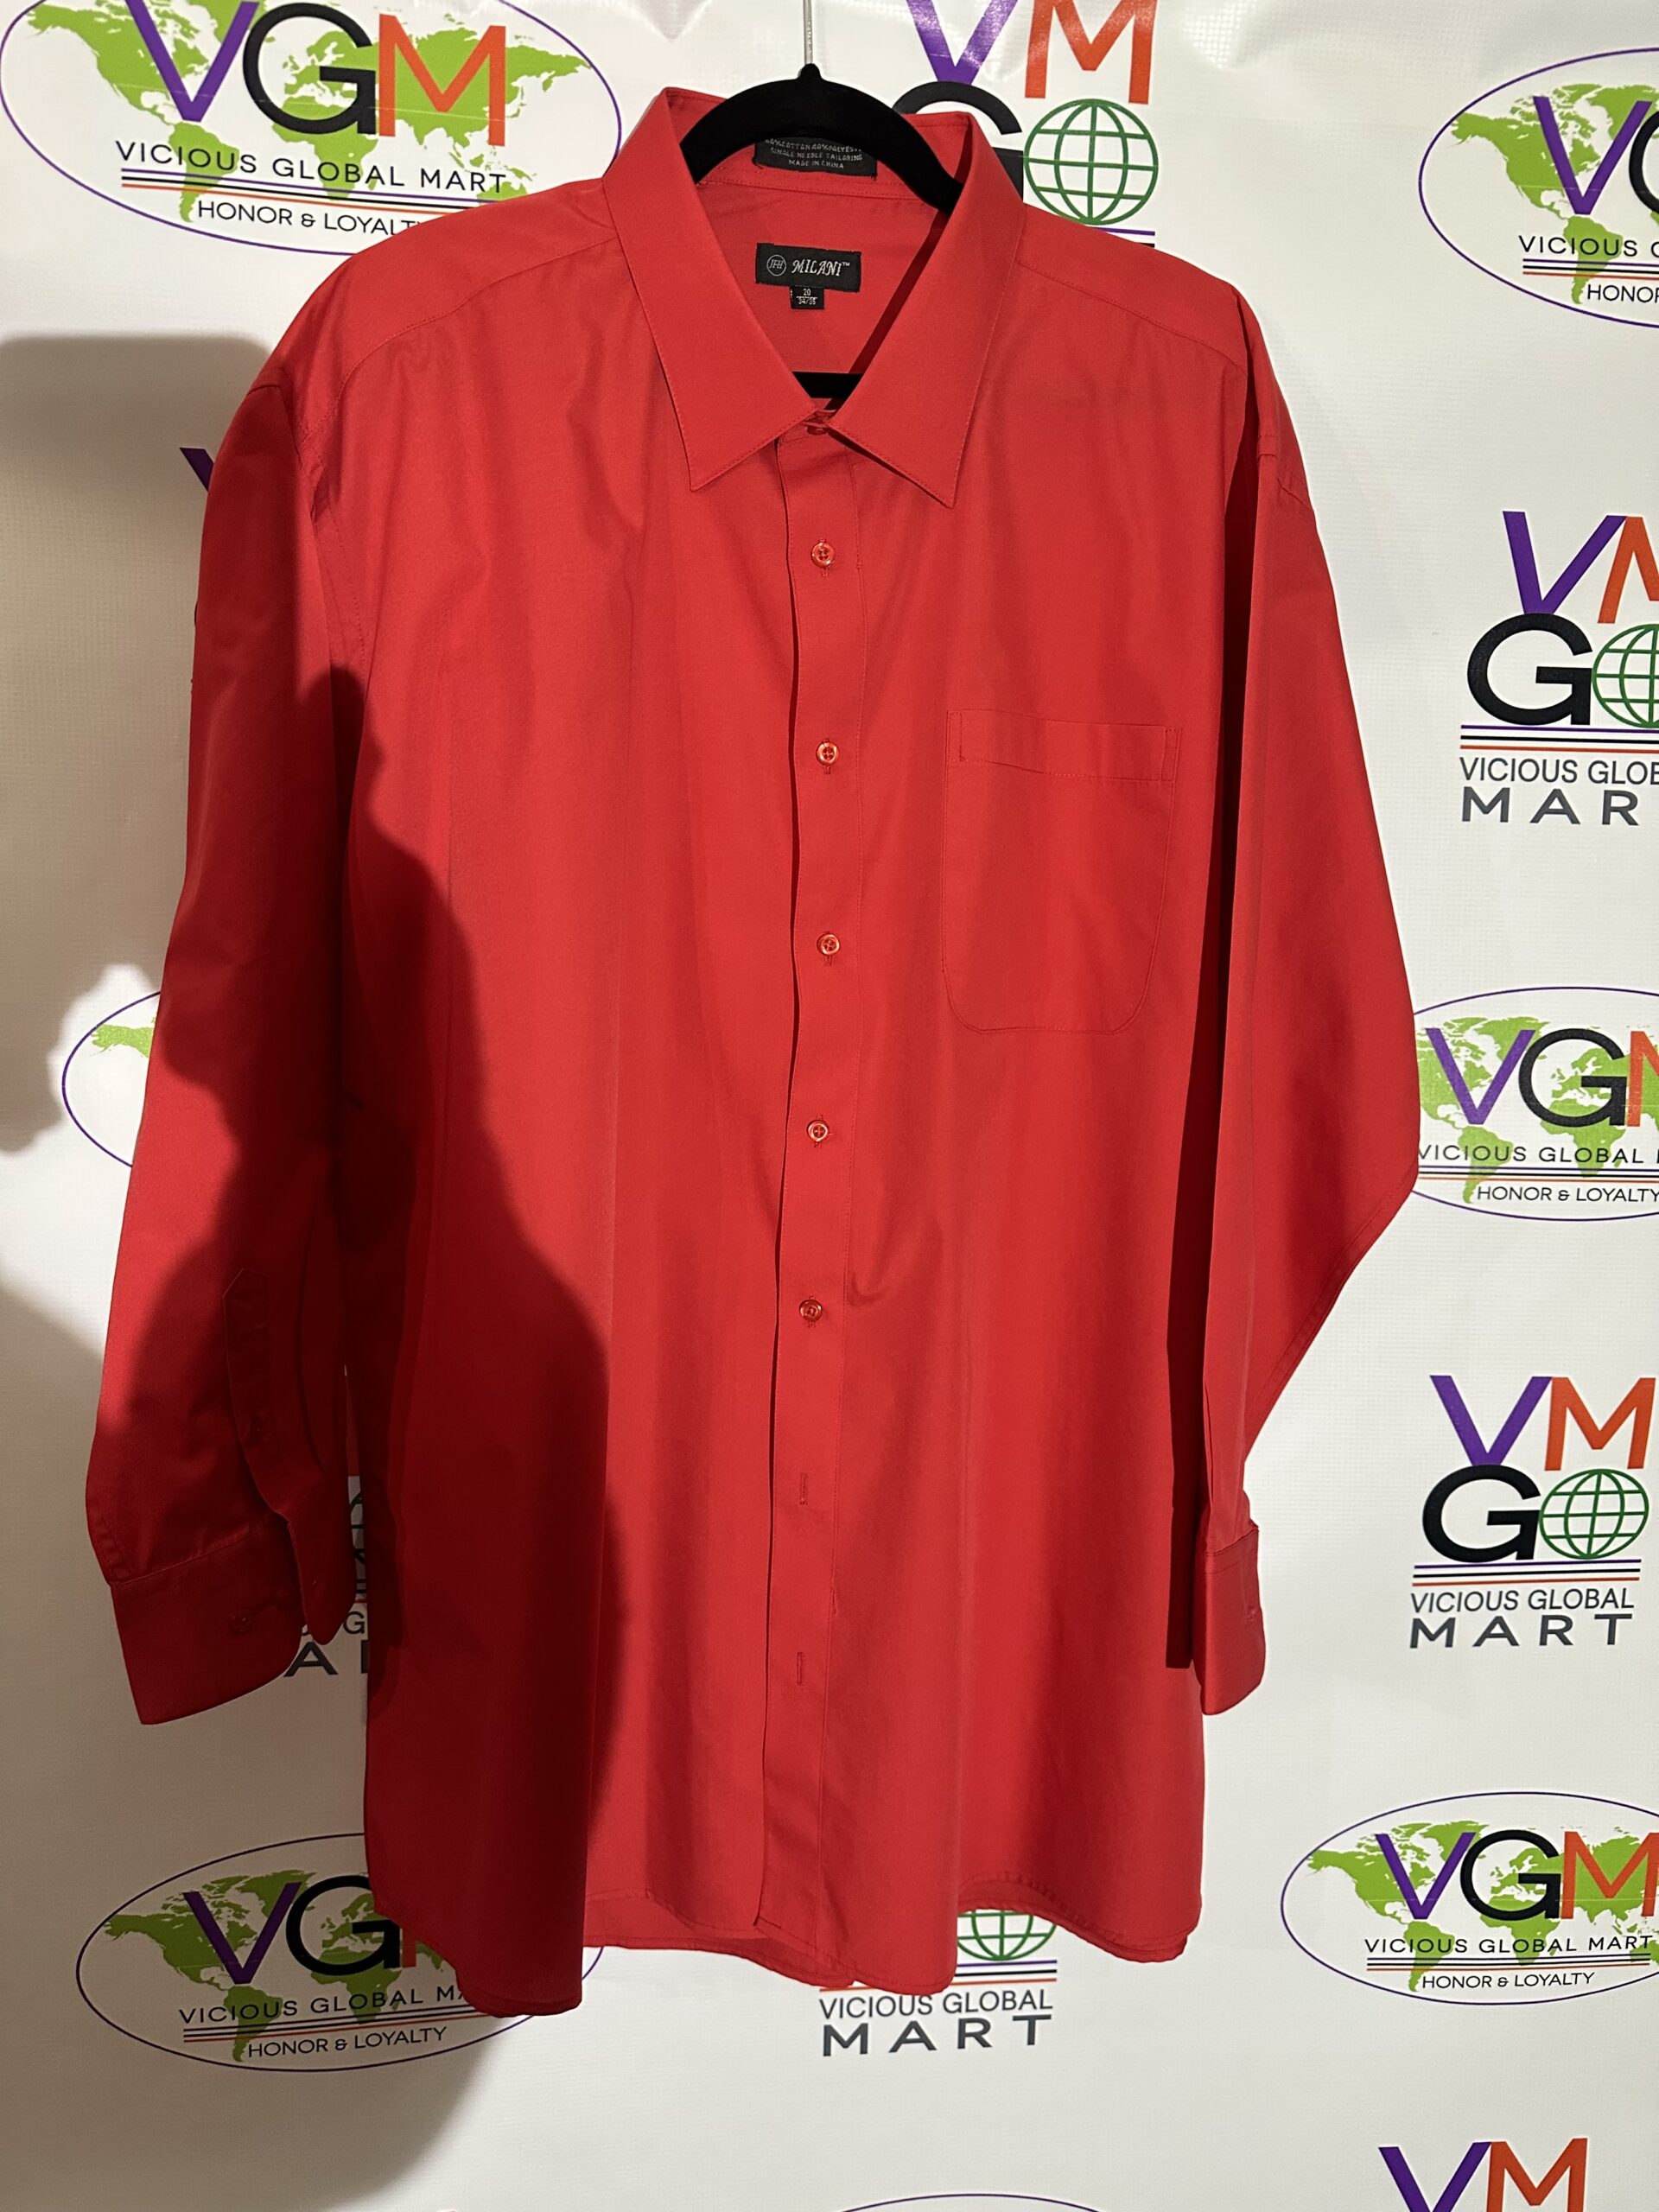 A Milani Dress Shirt hanging on a hanger with a logo on it.